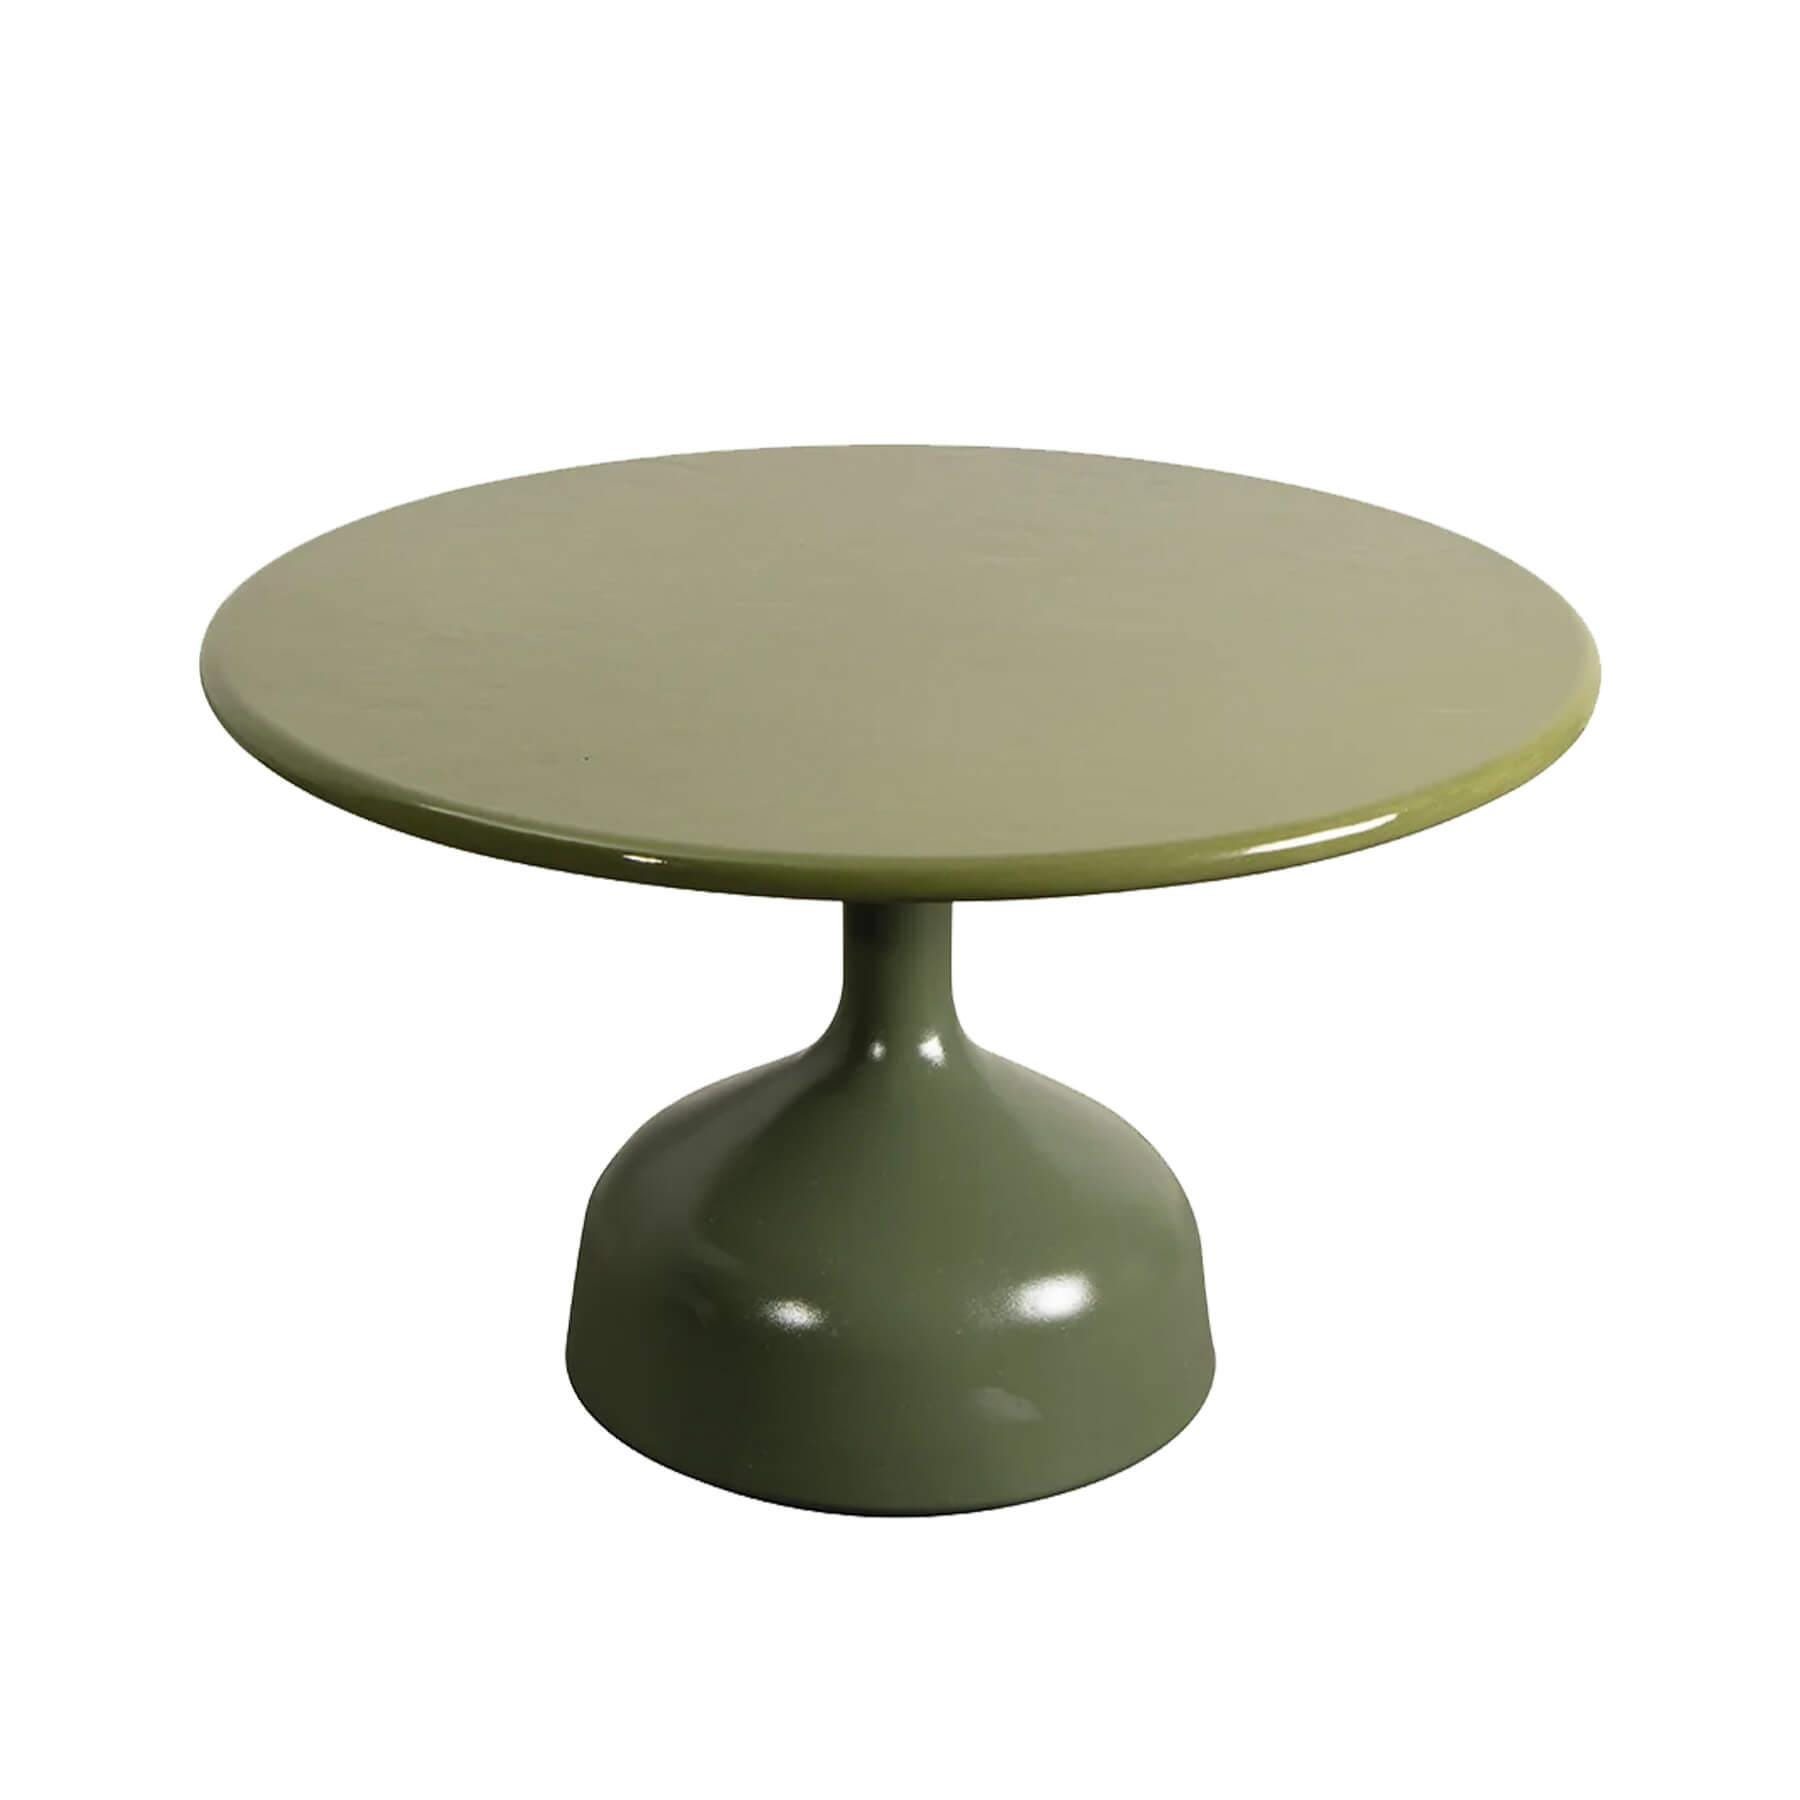 Caneline Glaze Coffee Table Large Olive Green Base Green Lava Stone Top Designer Furniture From Holloways Of Ludlow